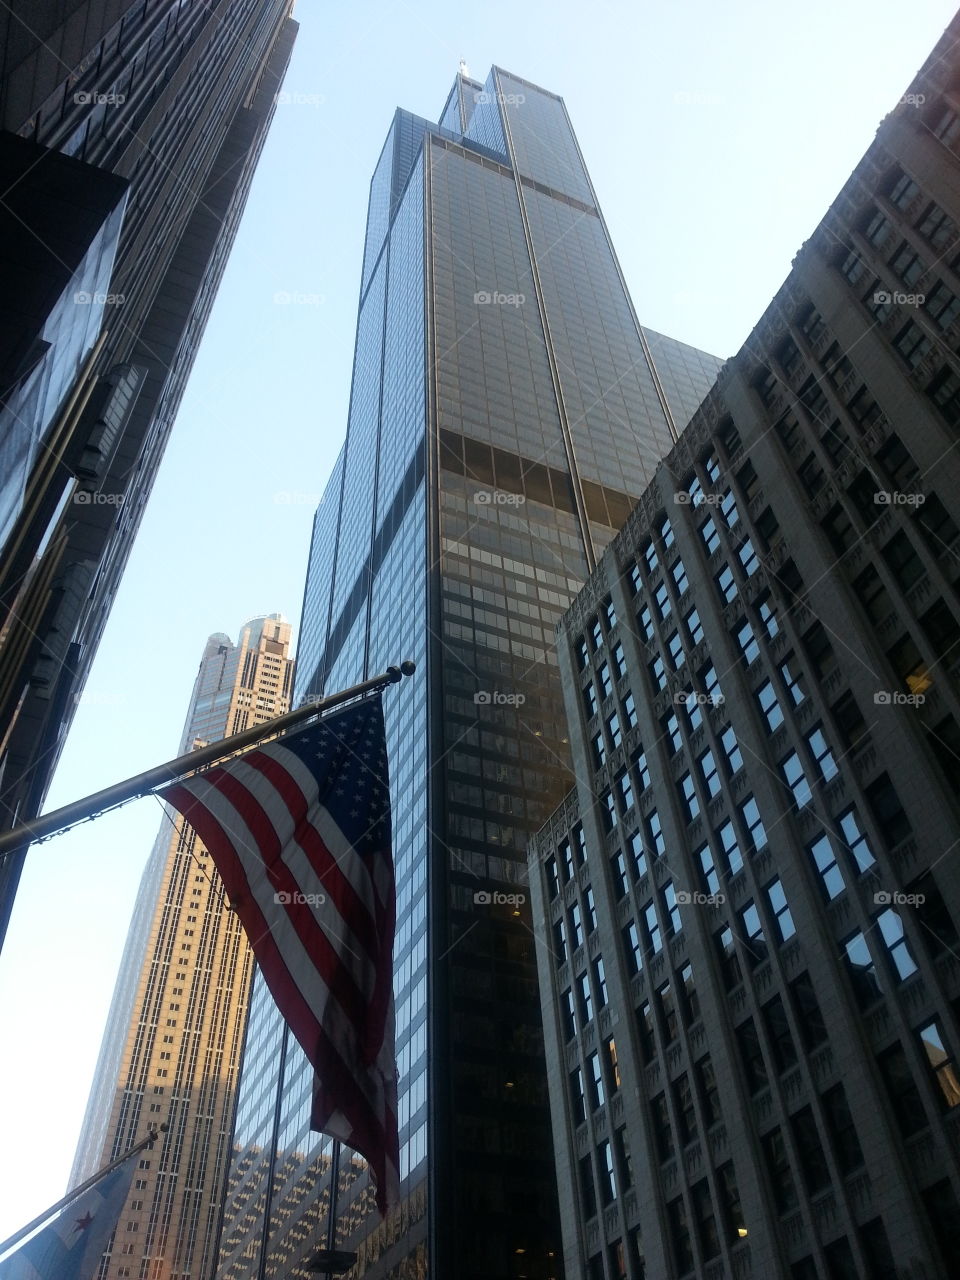 America The Beautiful. (it'll always be the Sears Tower!)